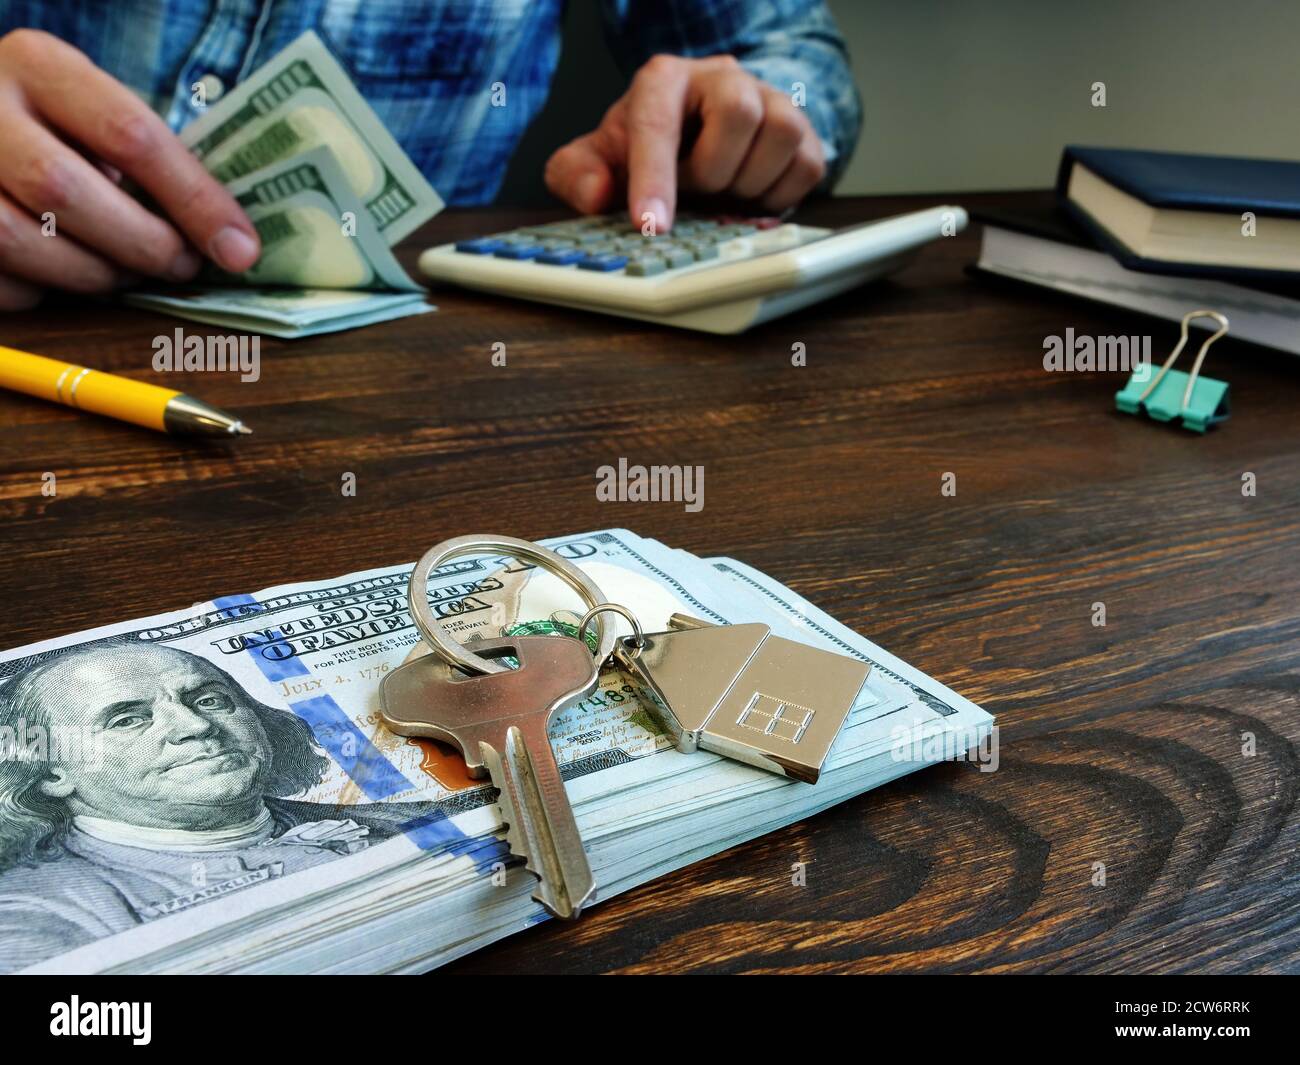 Money to buy real estate or mortgage. Key and dollars. Stock Photo